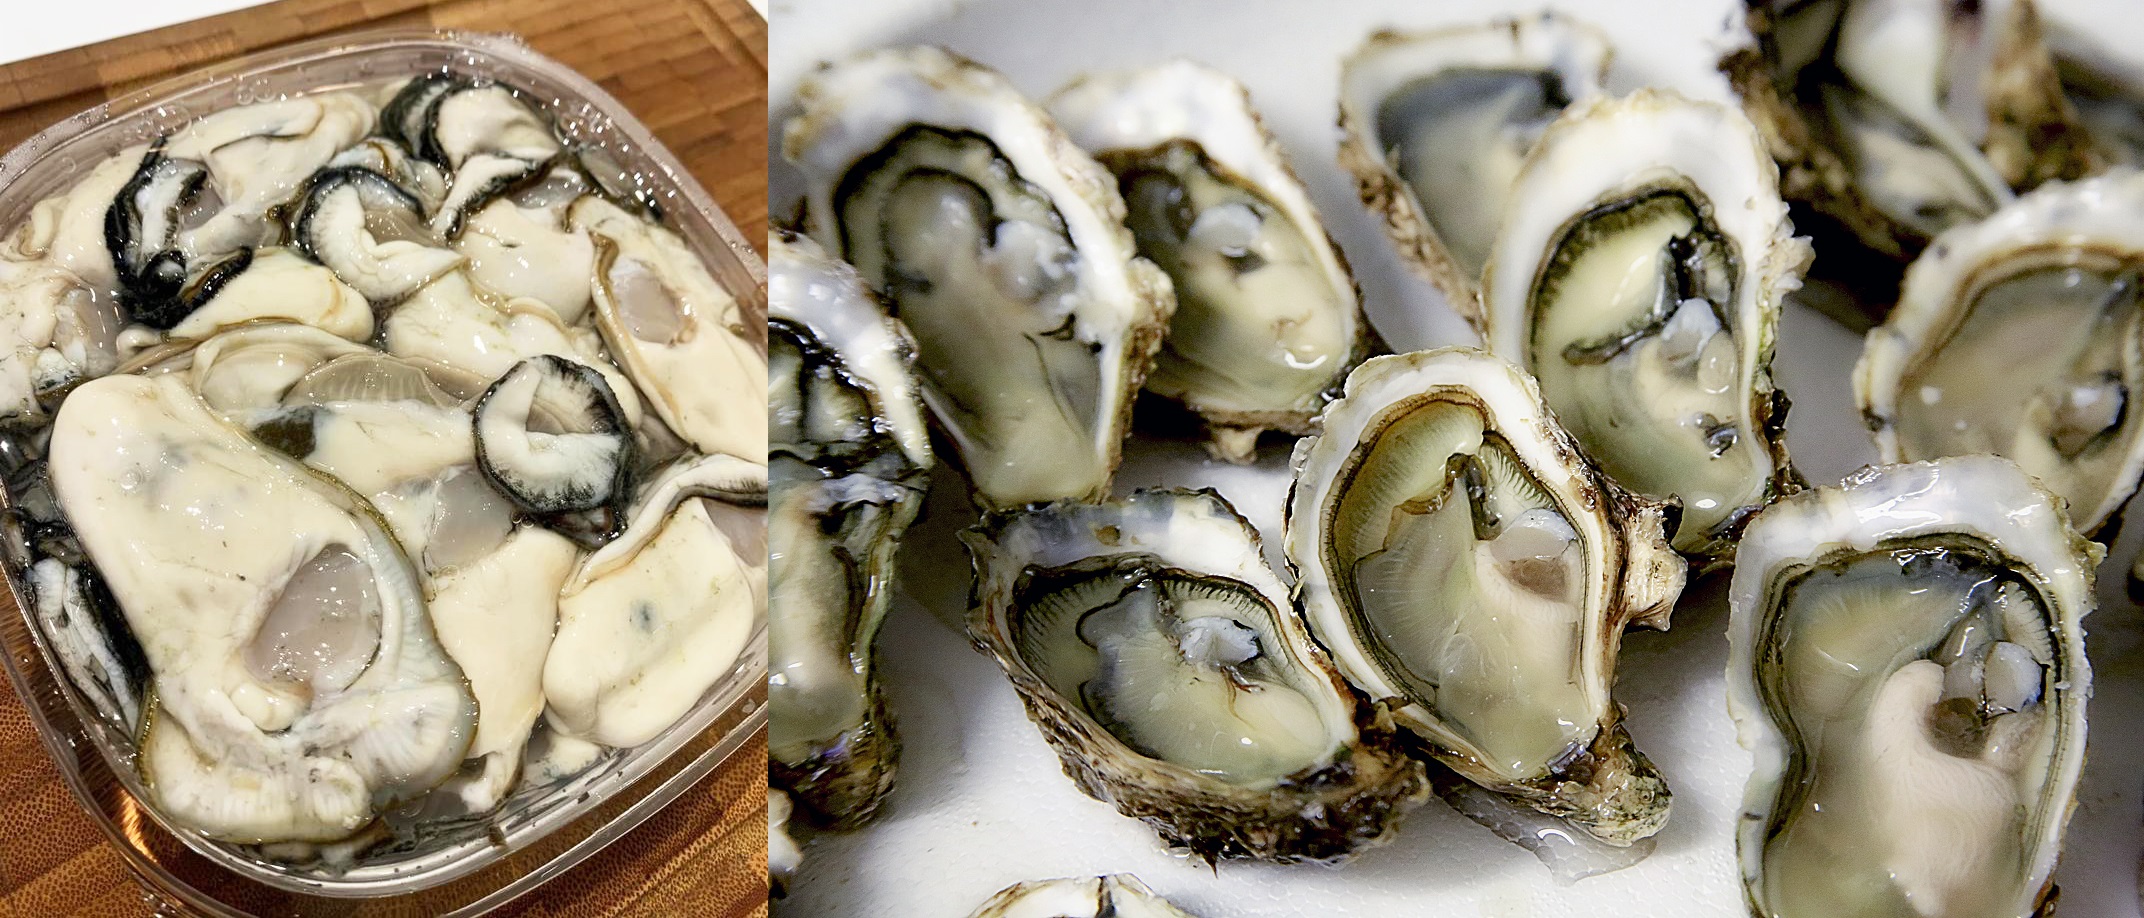 A photo of chilled pre-shucked raw oysters in a plastic tub and half-shell raw oysters